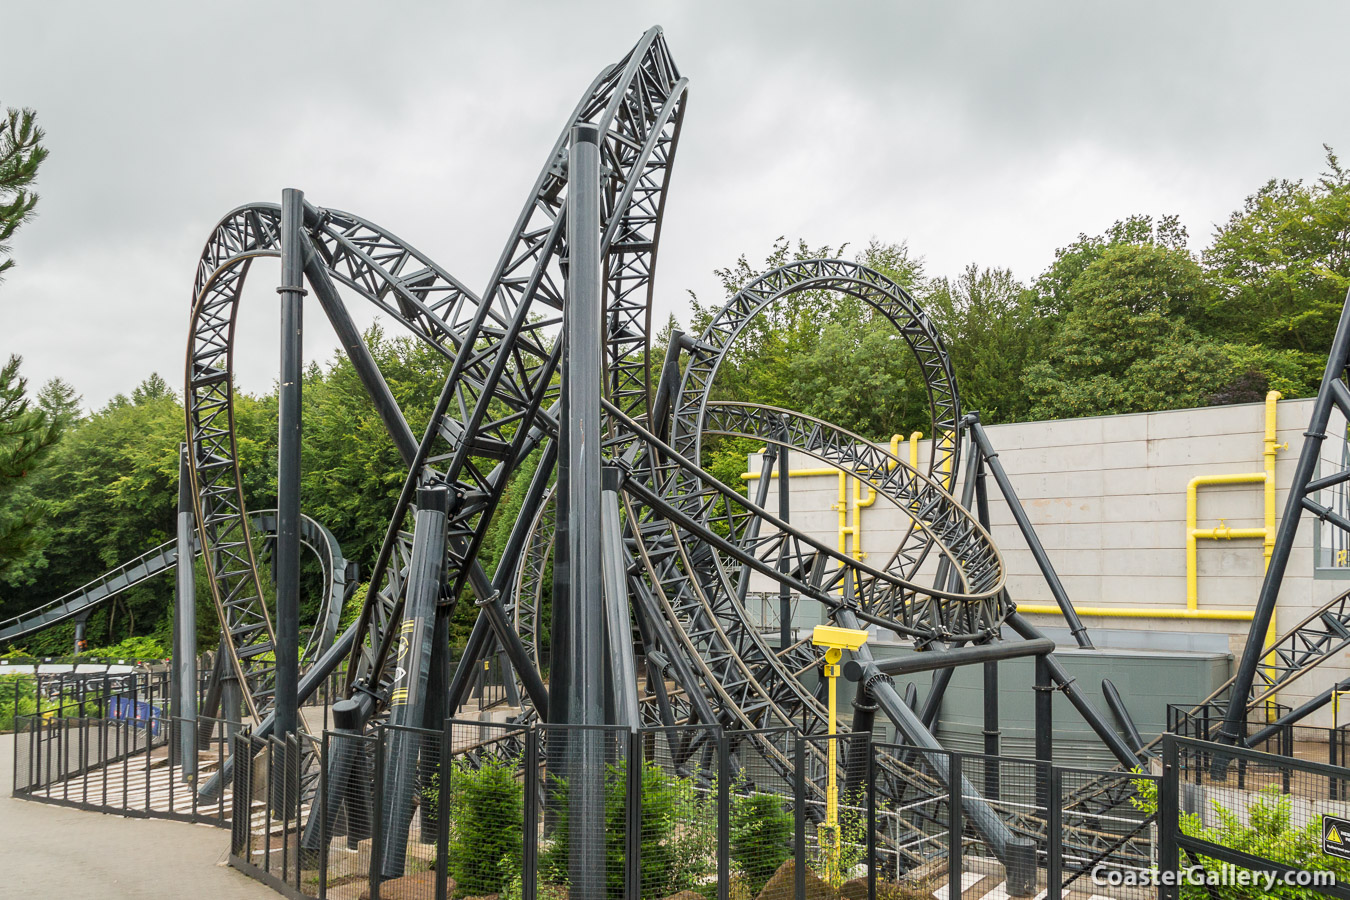 Accident on the Smiler roller coaster at Alton Towers